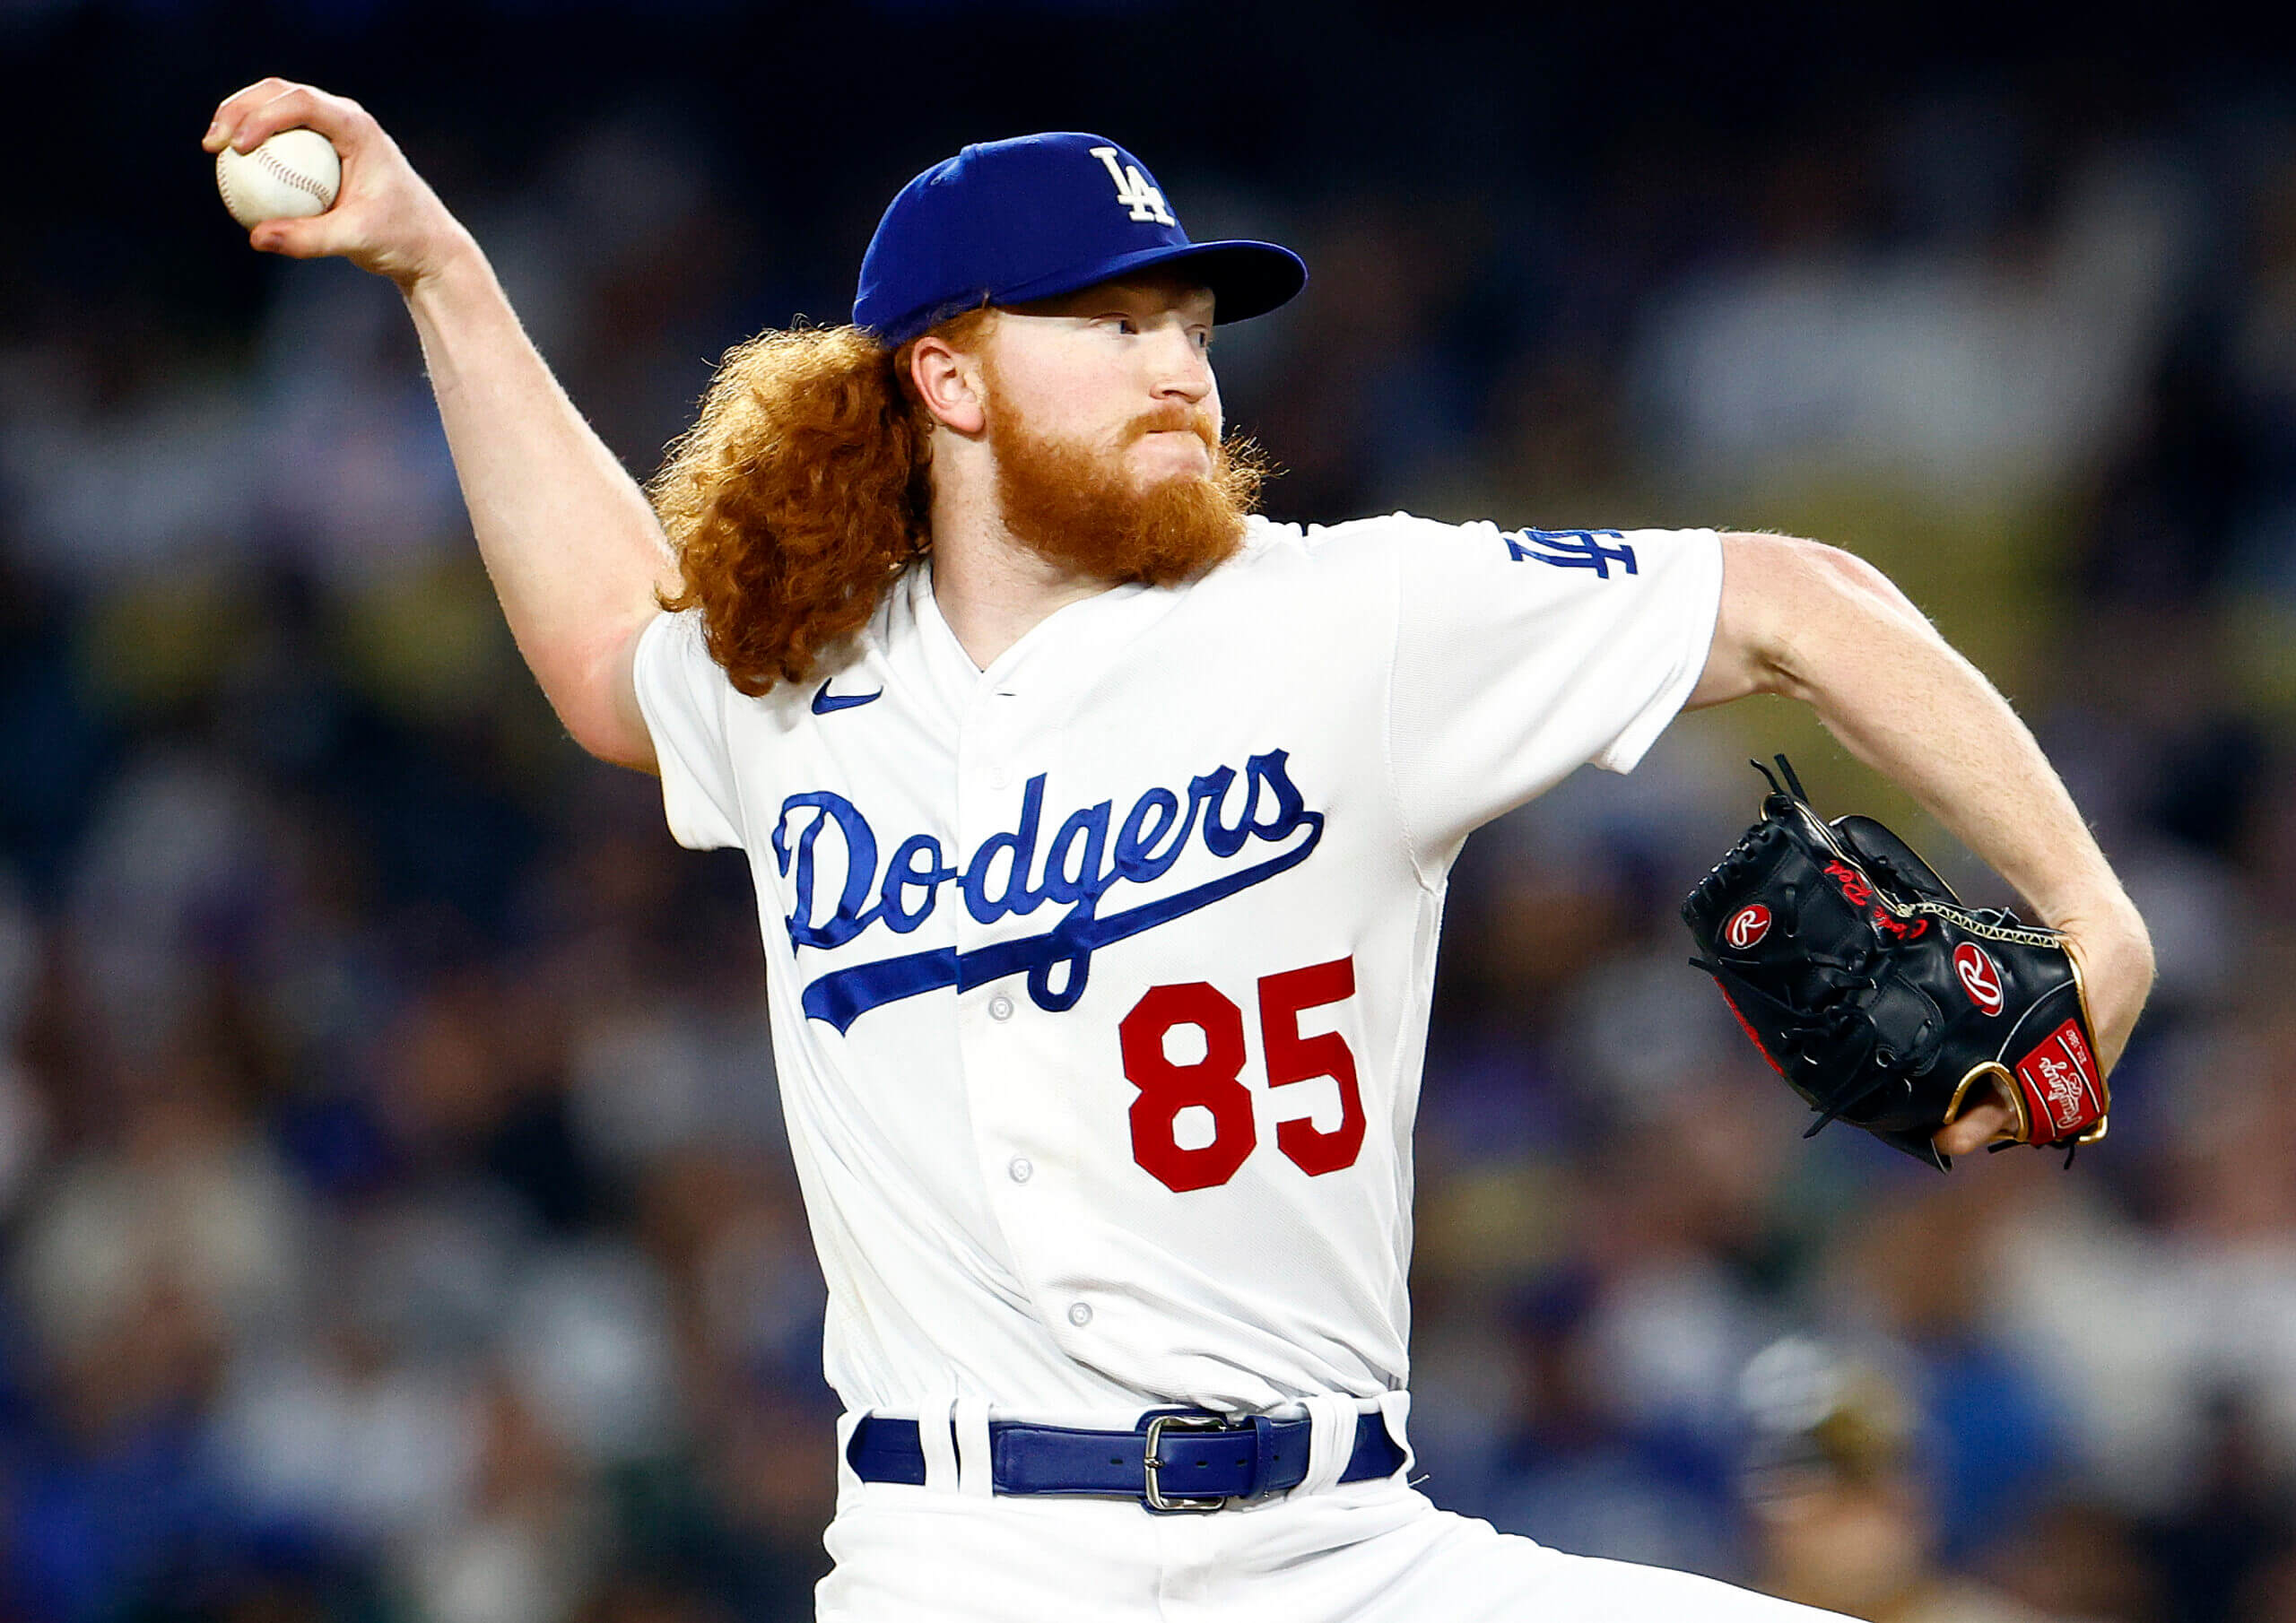 Dodgers' May out for season after esophageal surgery